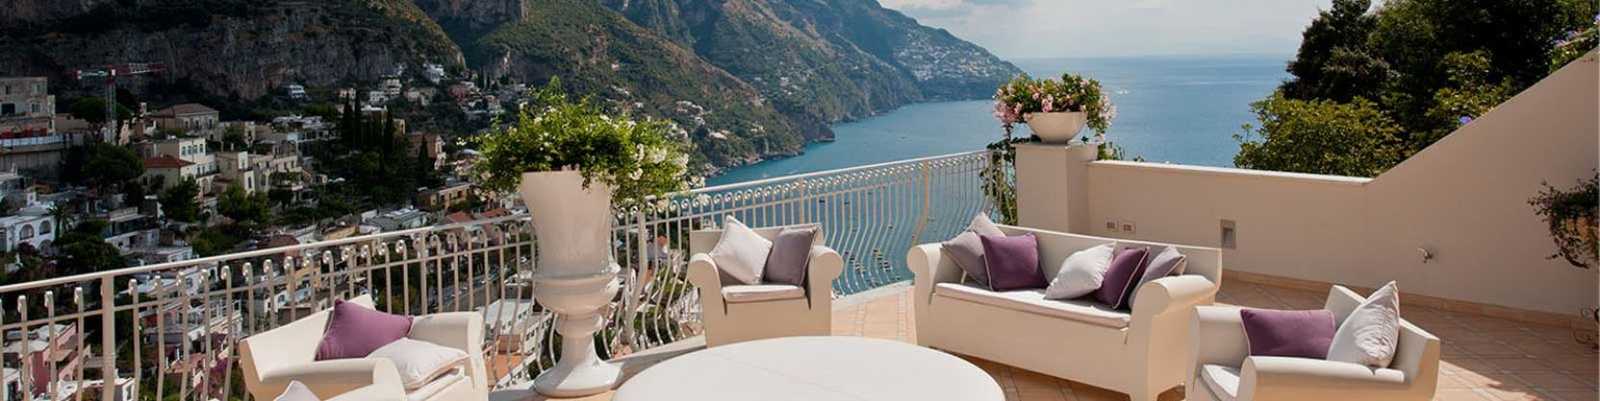 Authentic Italian Villas VS. Luxury Hotels When Going on Holiday in Italy